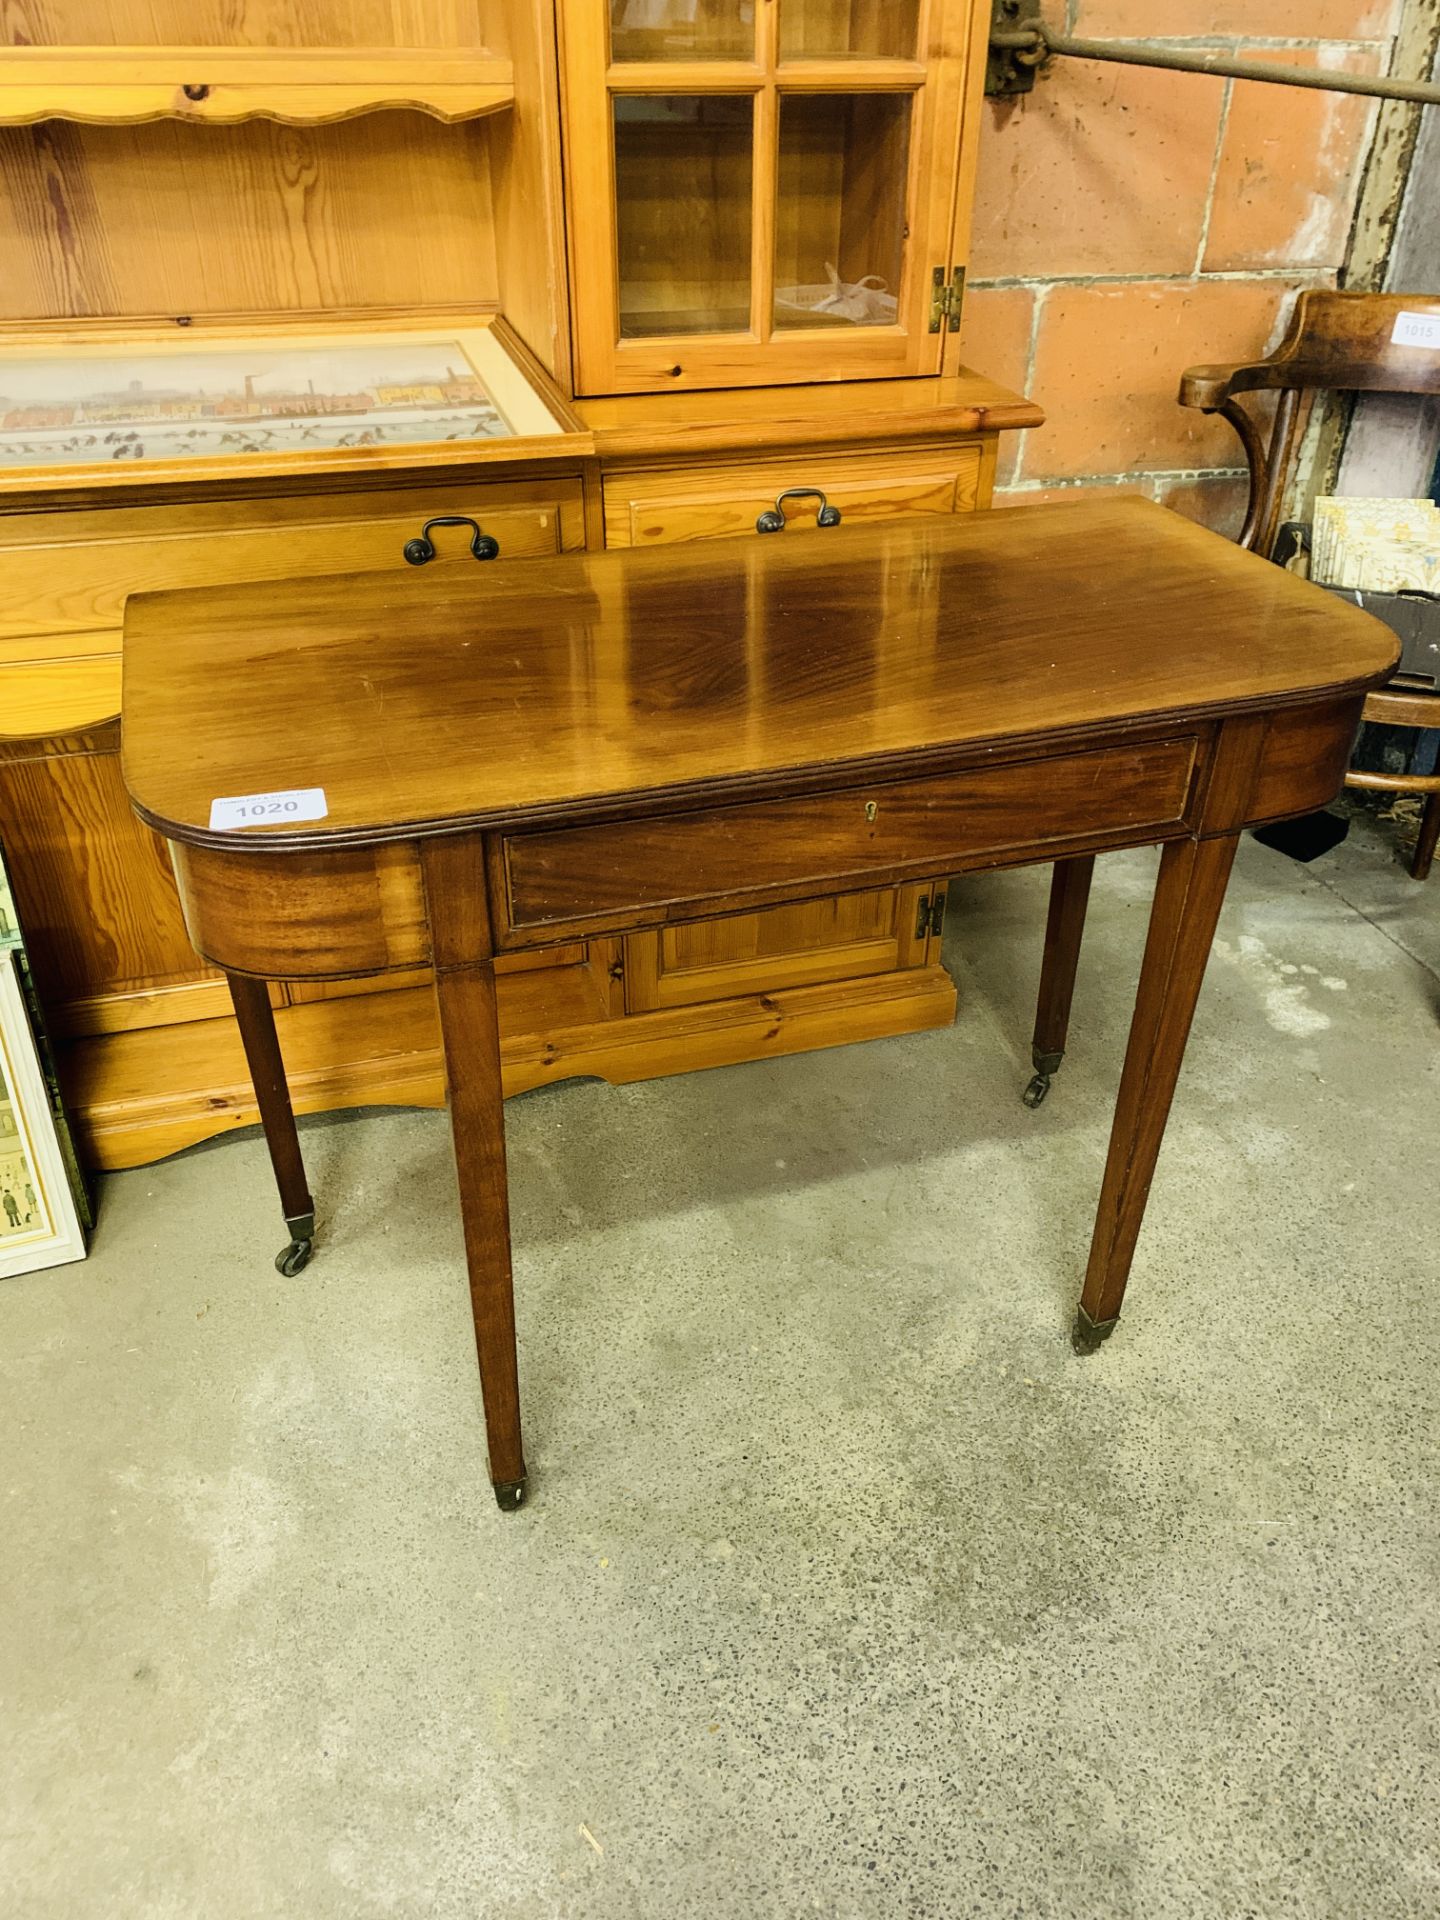 Mahogany side table with frieze drawer.